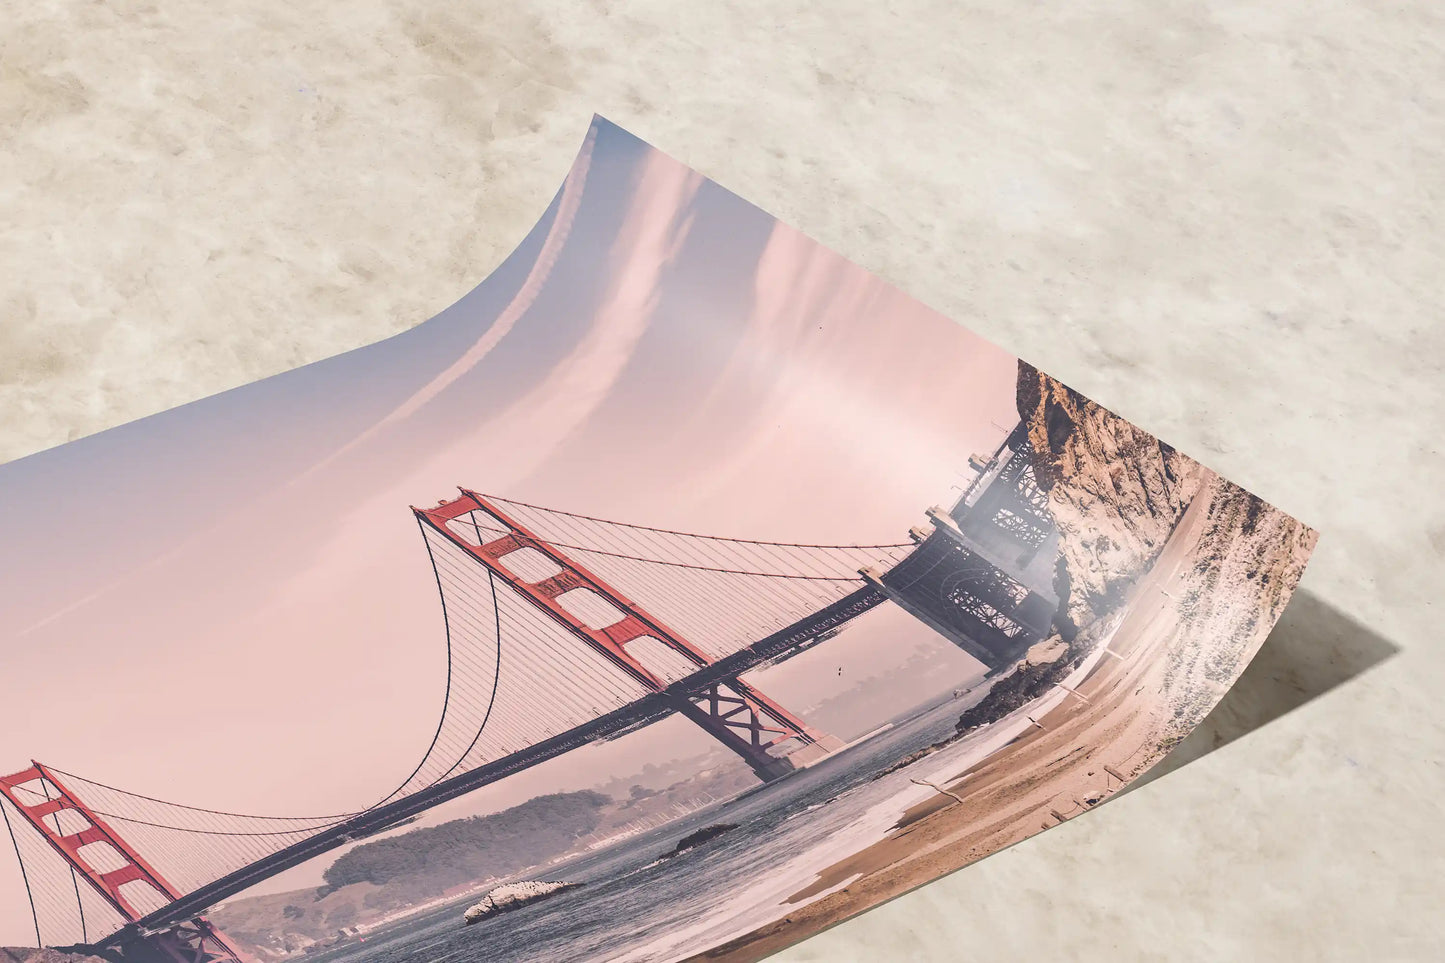 Curled corner of a vintage-style print depicting the Golden Gate Bridge in warm hues, ideal for classic San Francisco-themed wall decor.